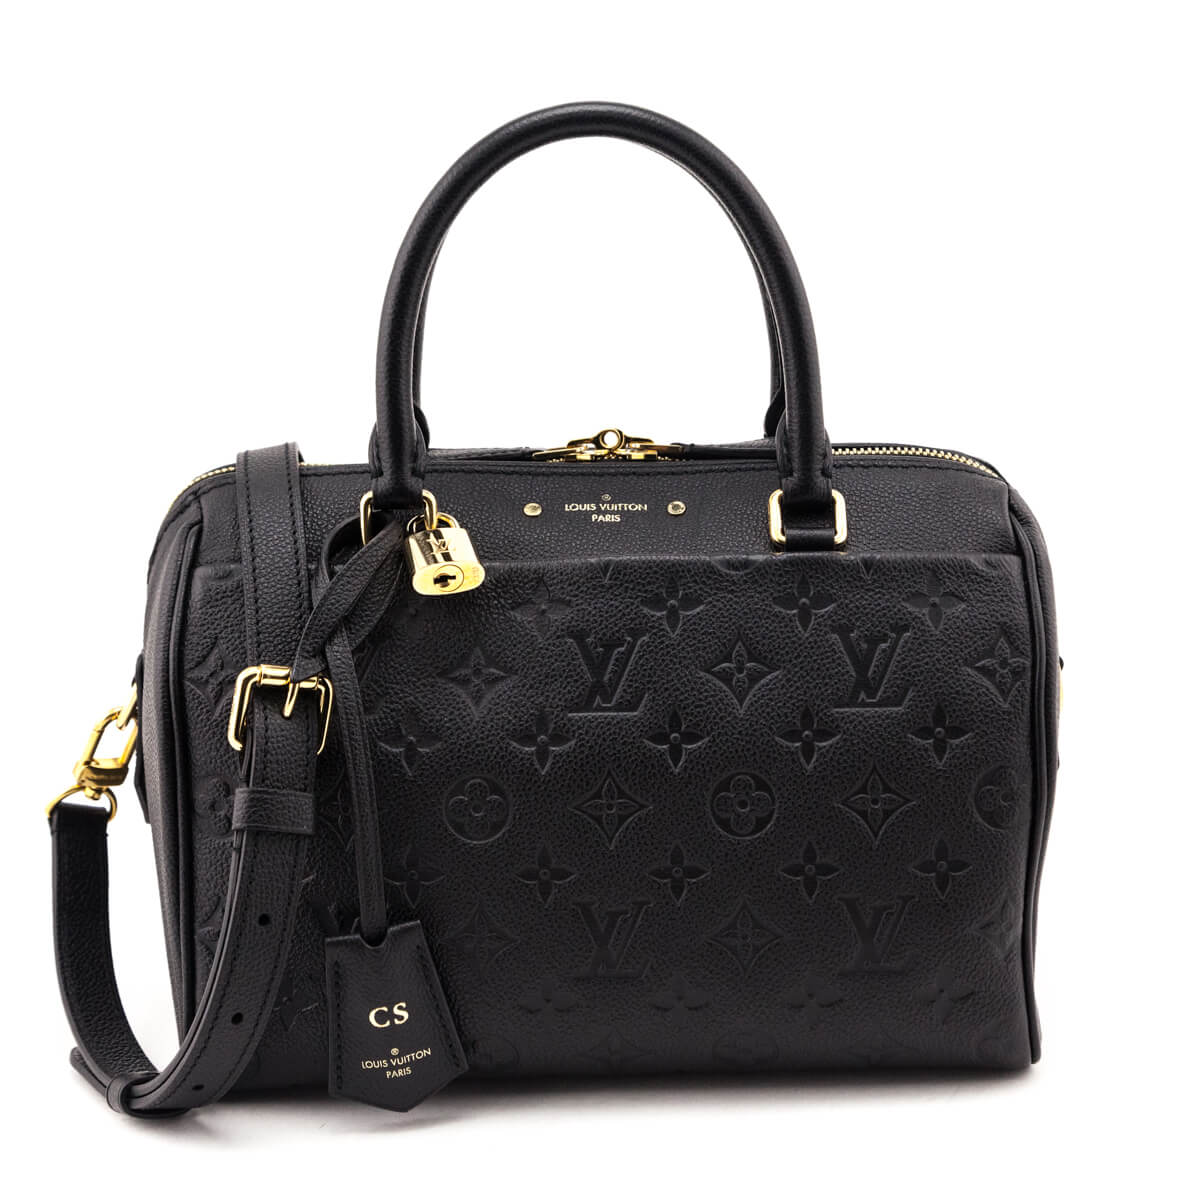 Louis Vuitton - Preowned Designer Clothing & Shoes - Love that Bag etc –  Love that Bag etc - Preowned Designer Fashions